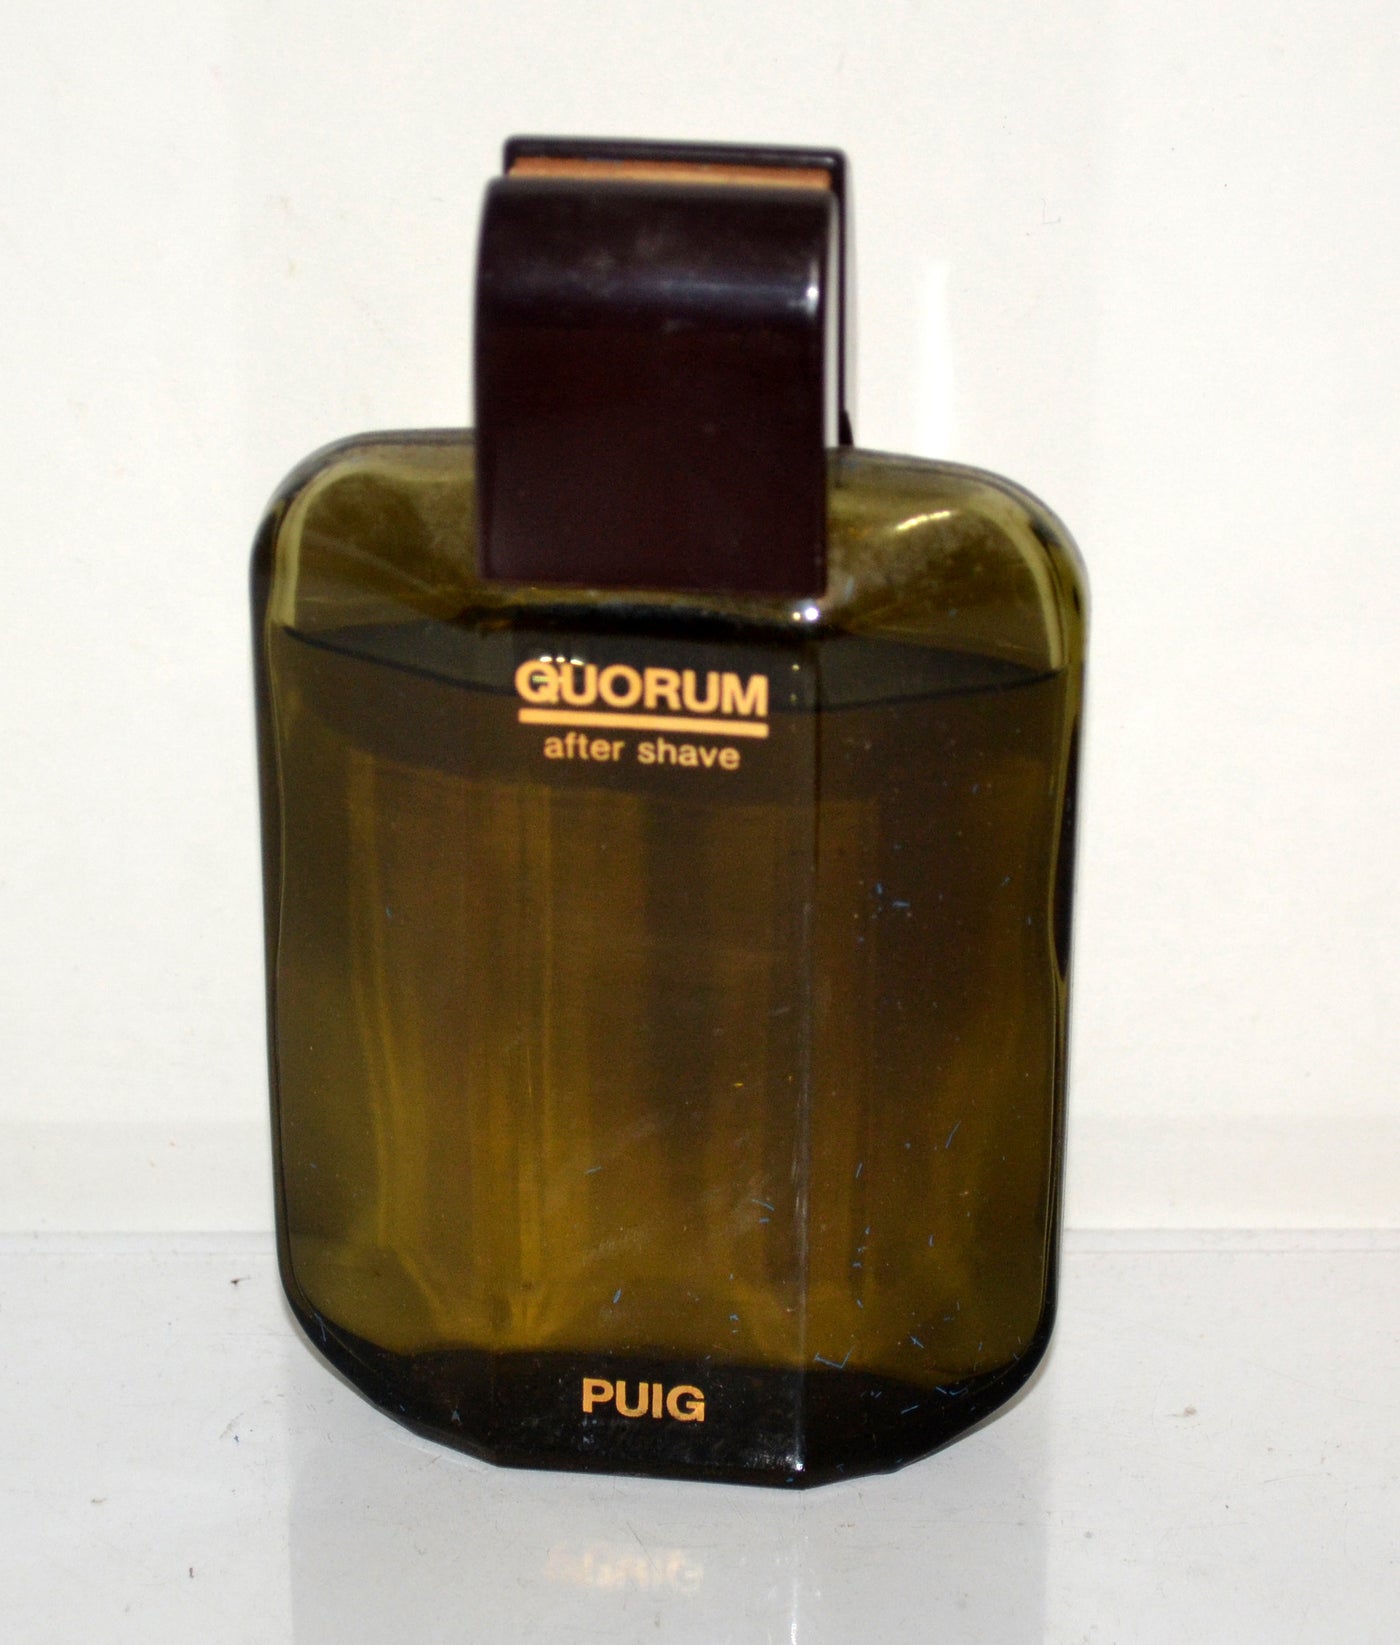 Puig Quorum After Shave